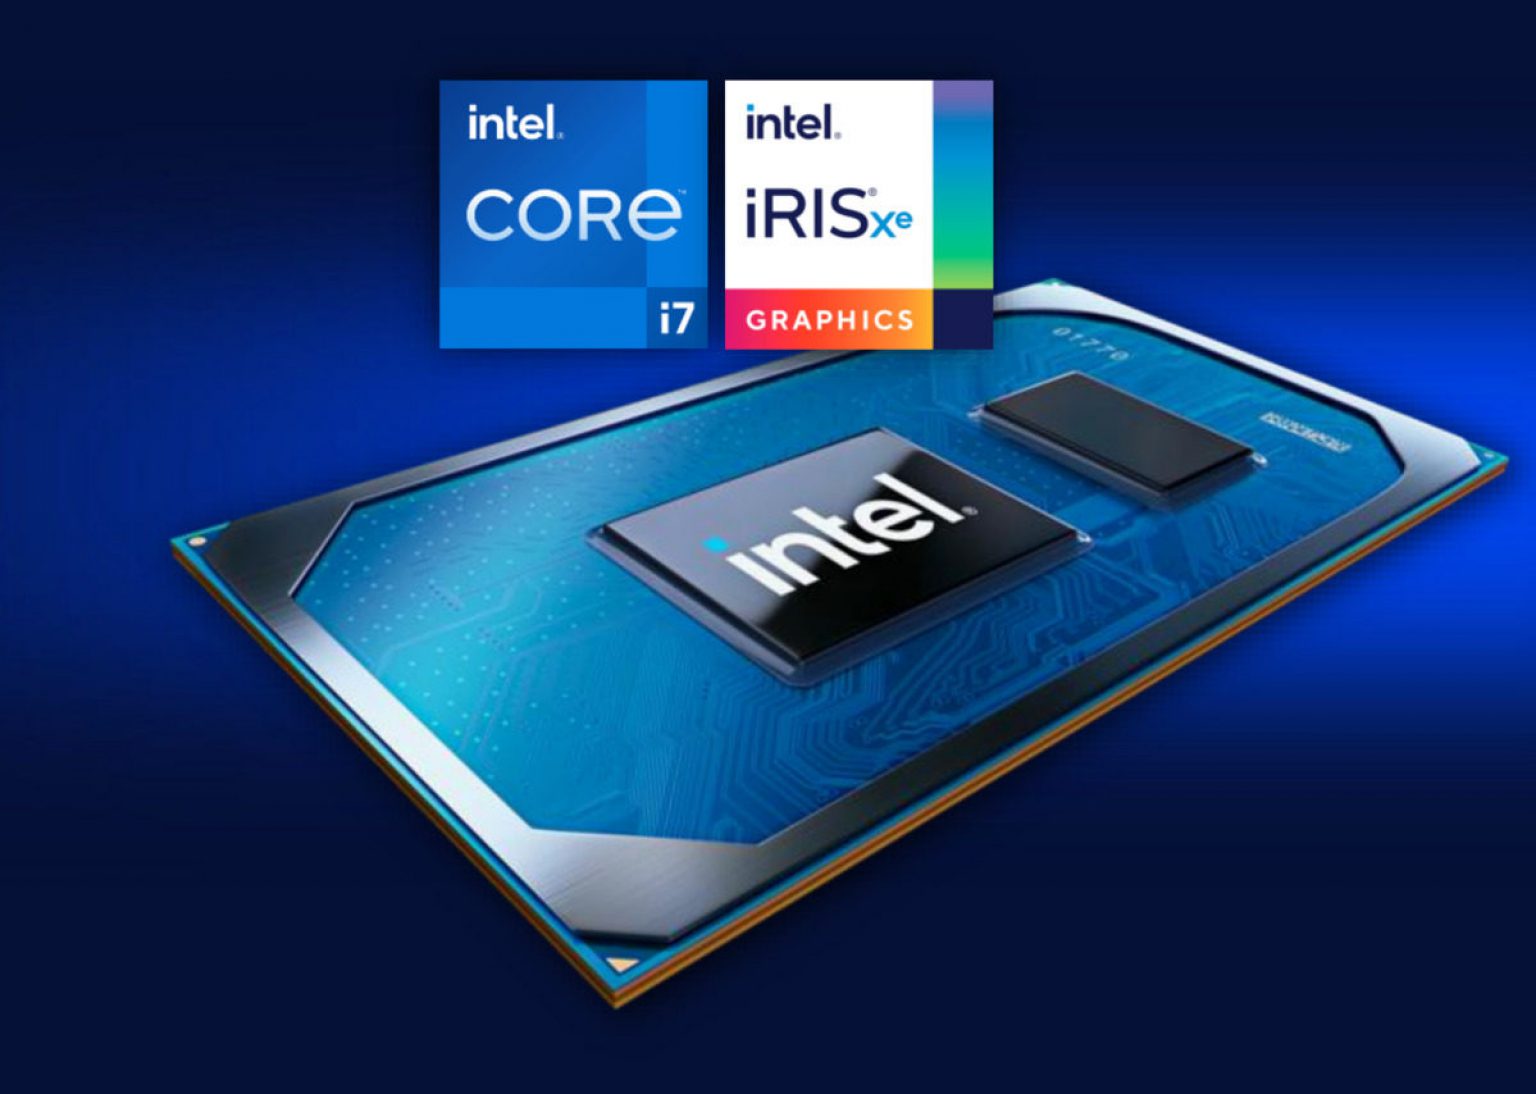 Intel Iris Xe Graphics Brings Sensuality and Eroticism to Your Adult Gallery Collection